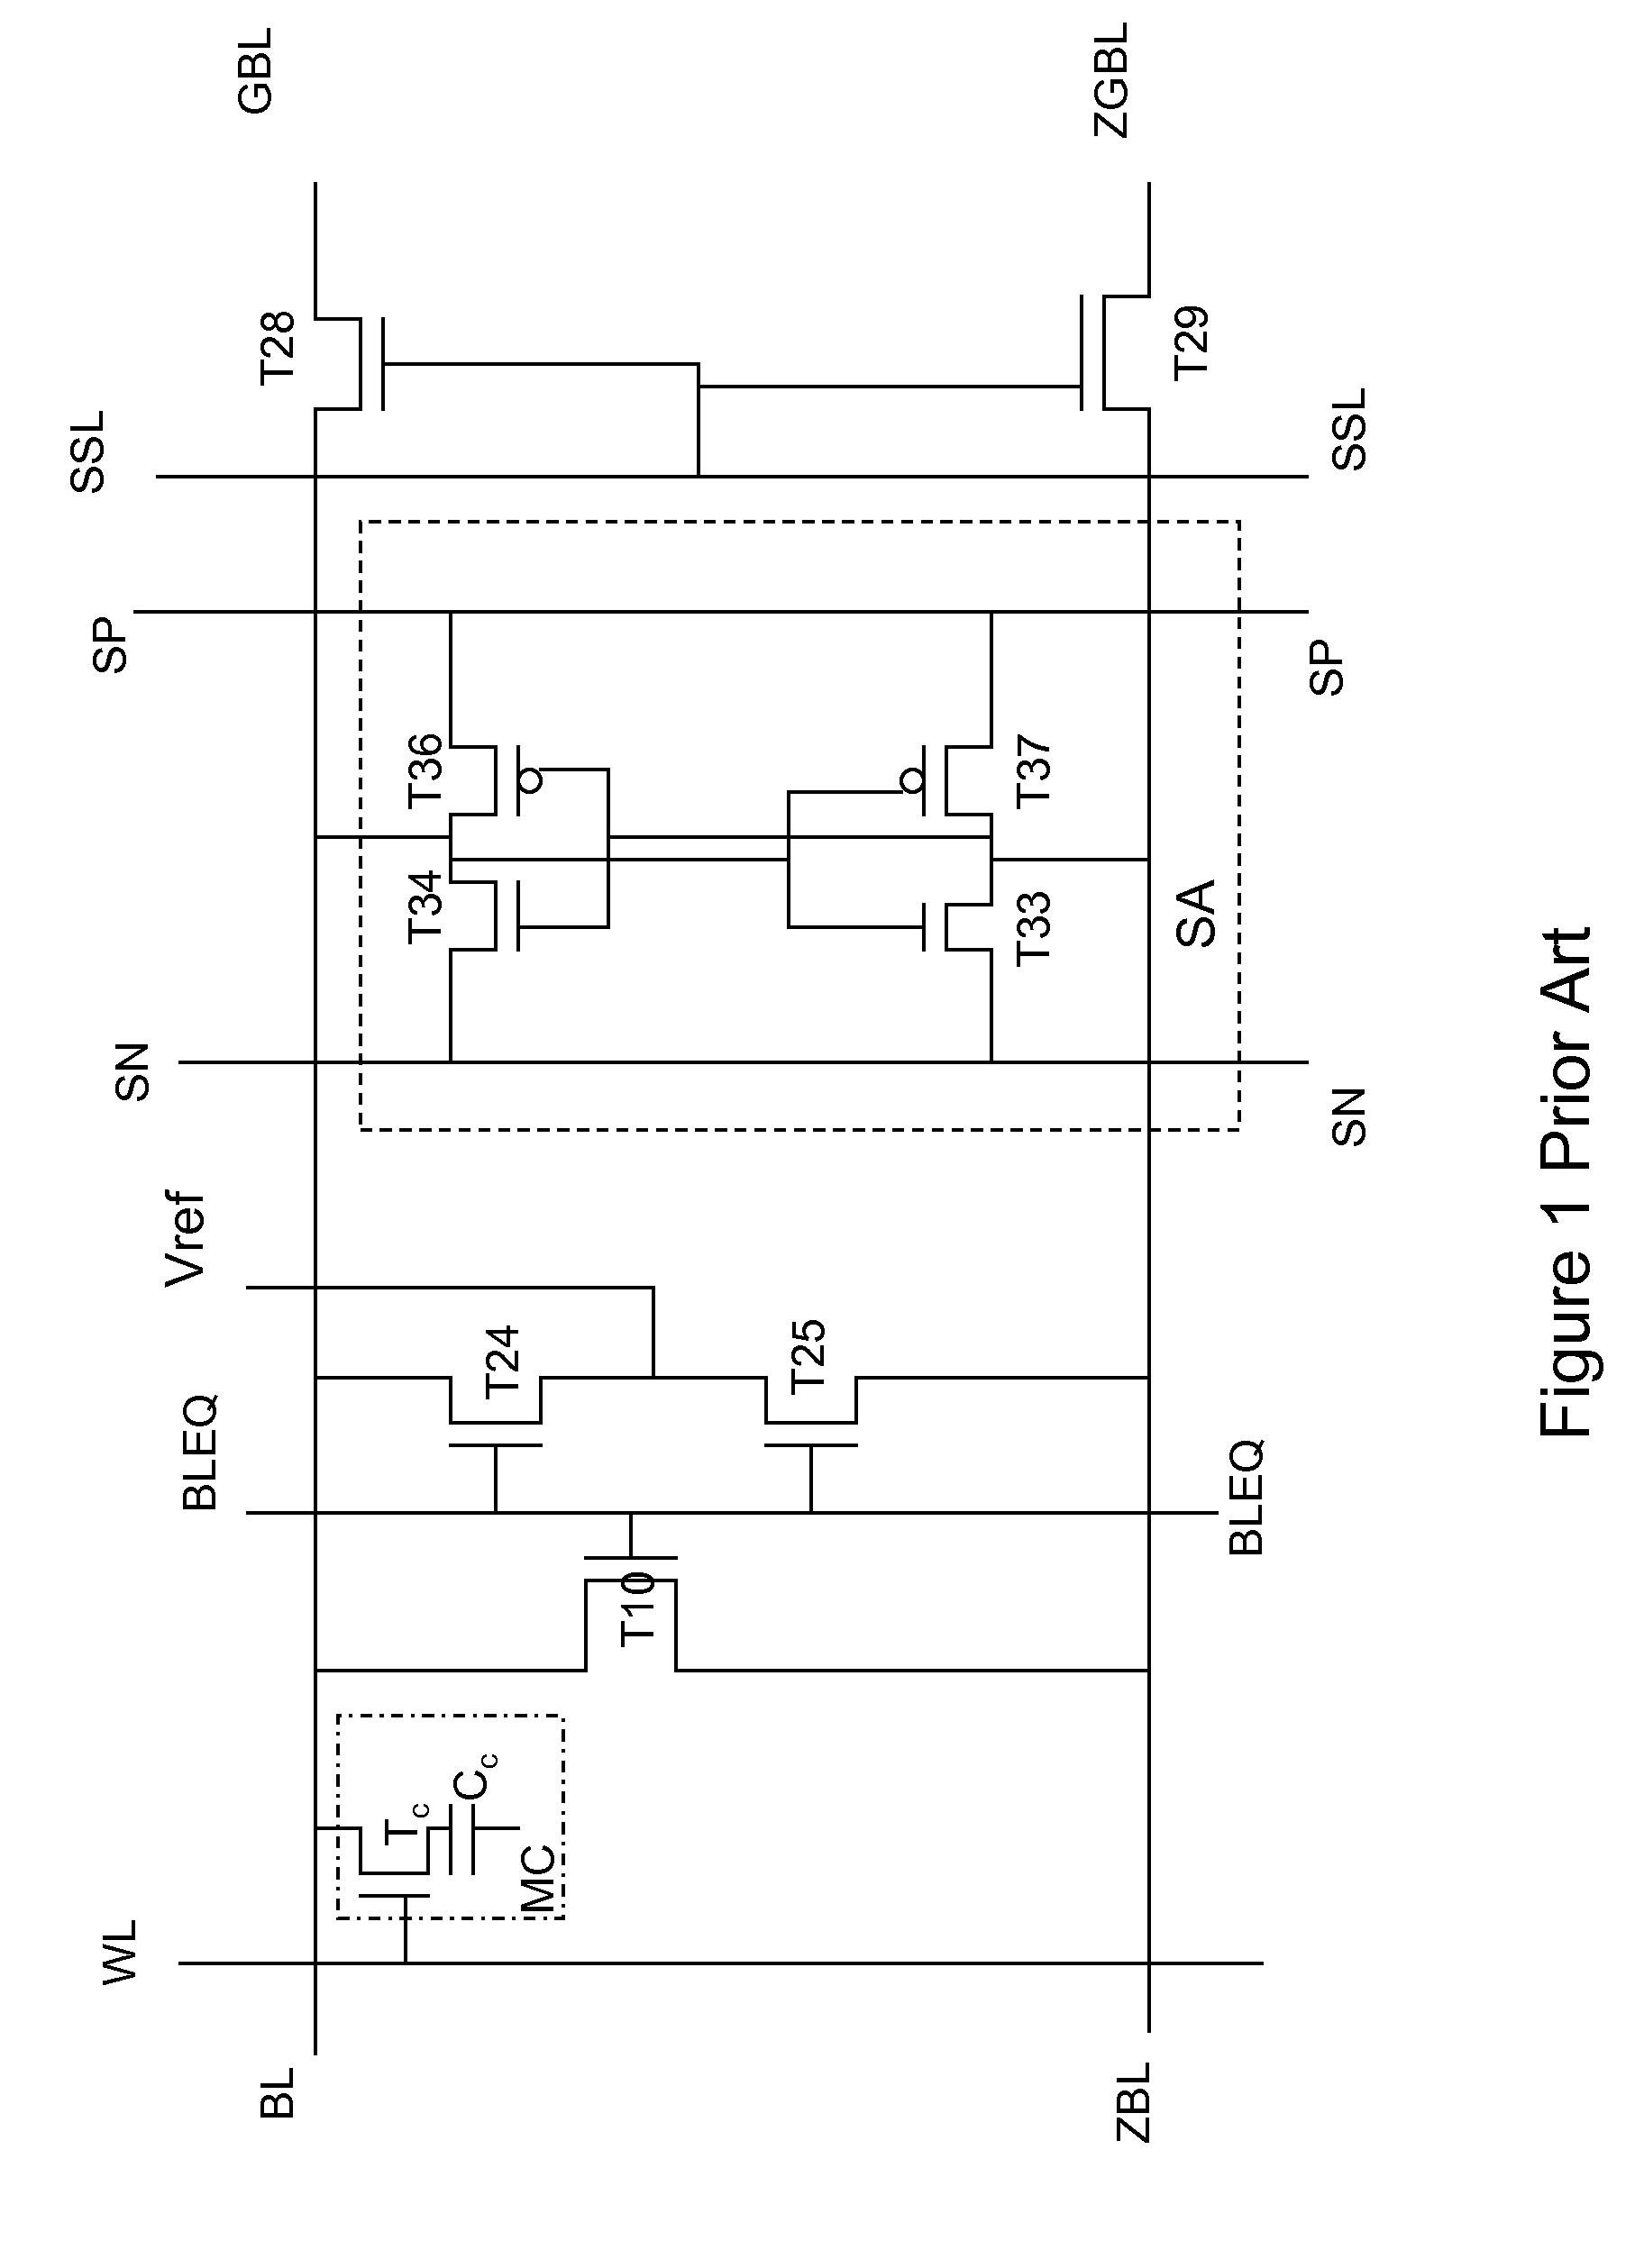 Circuit for high speed dynamic memory